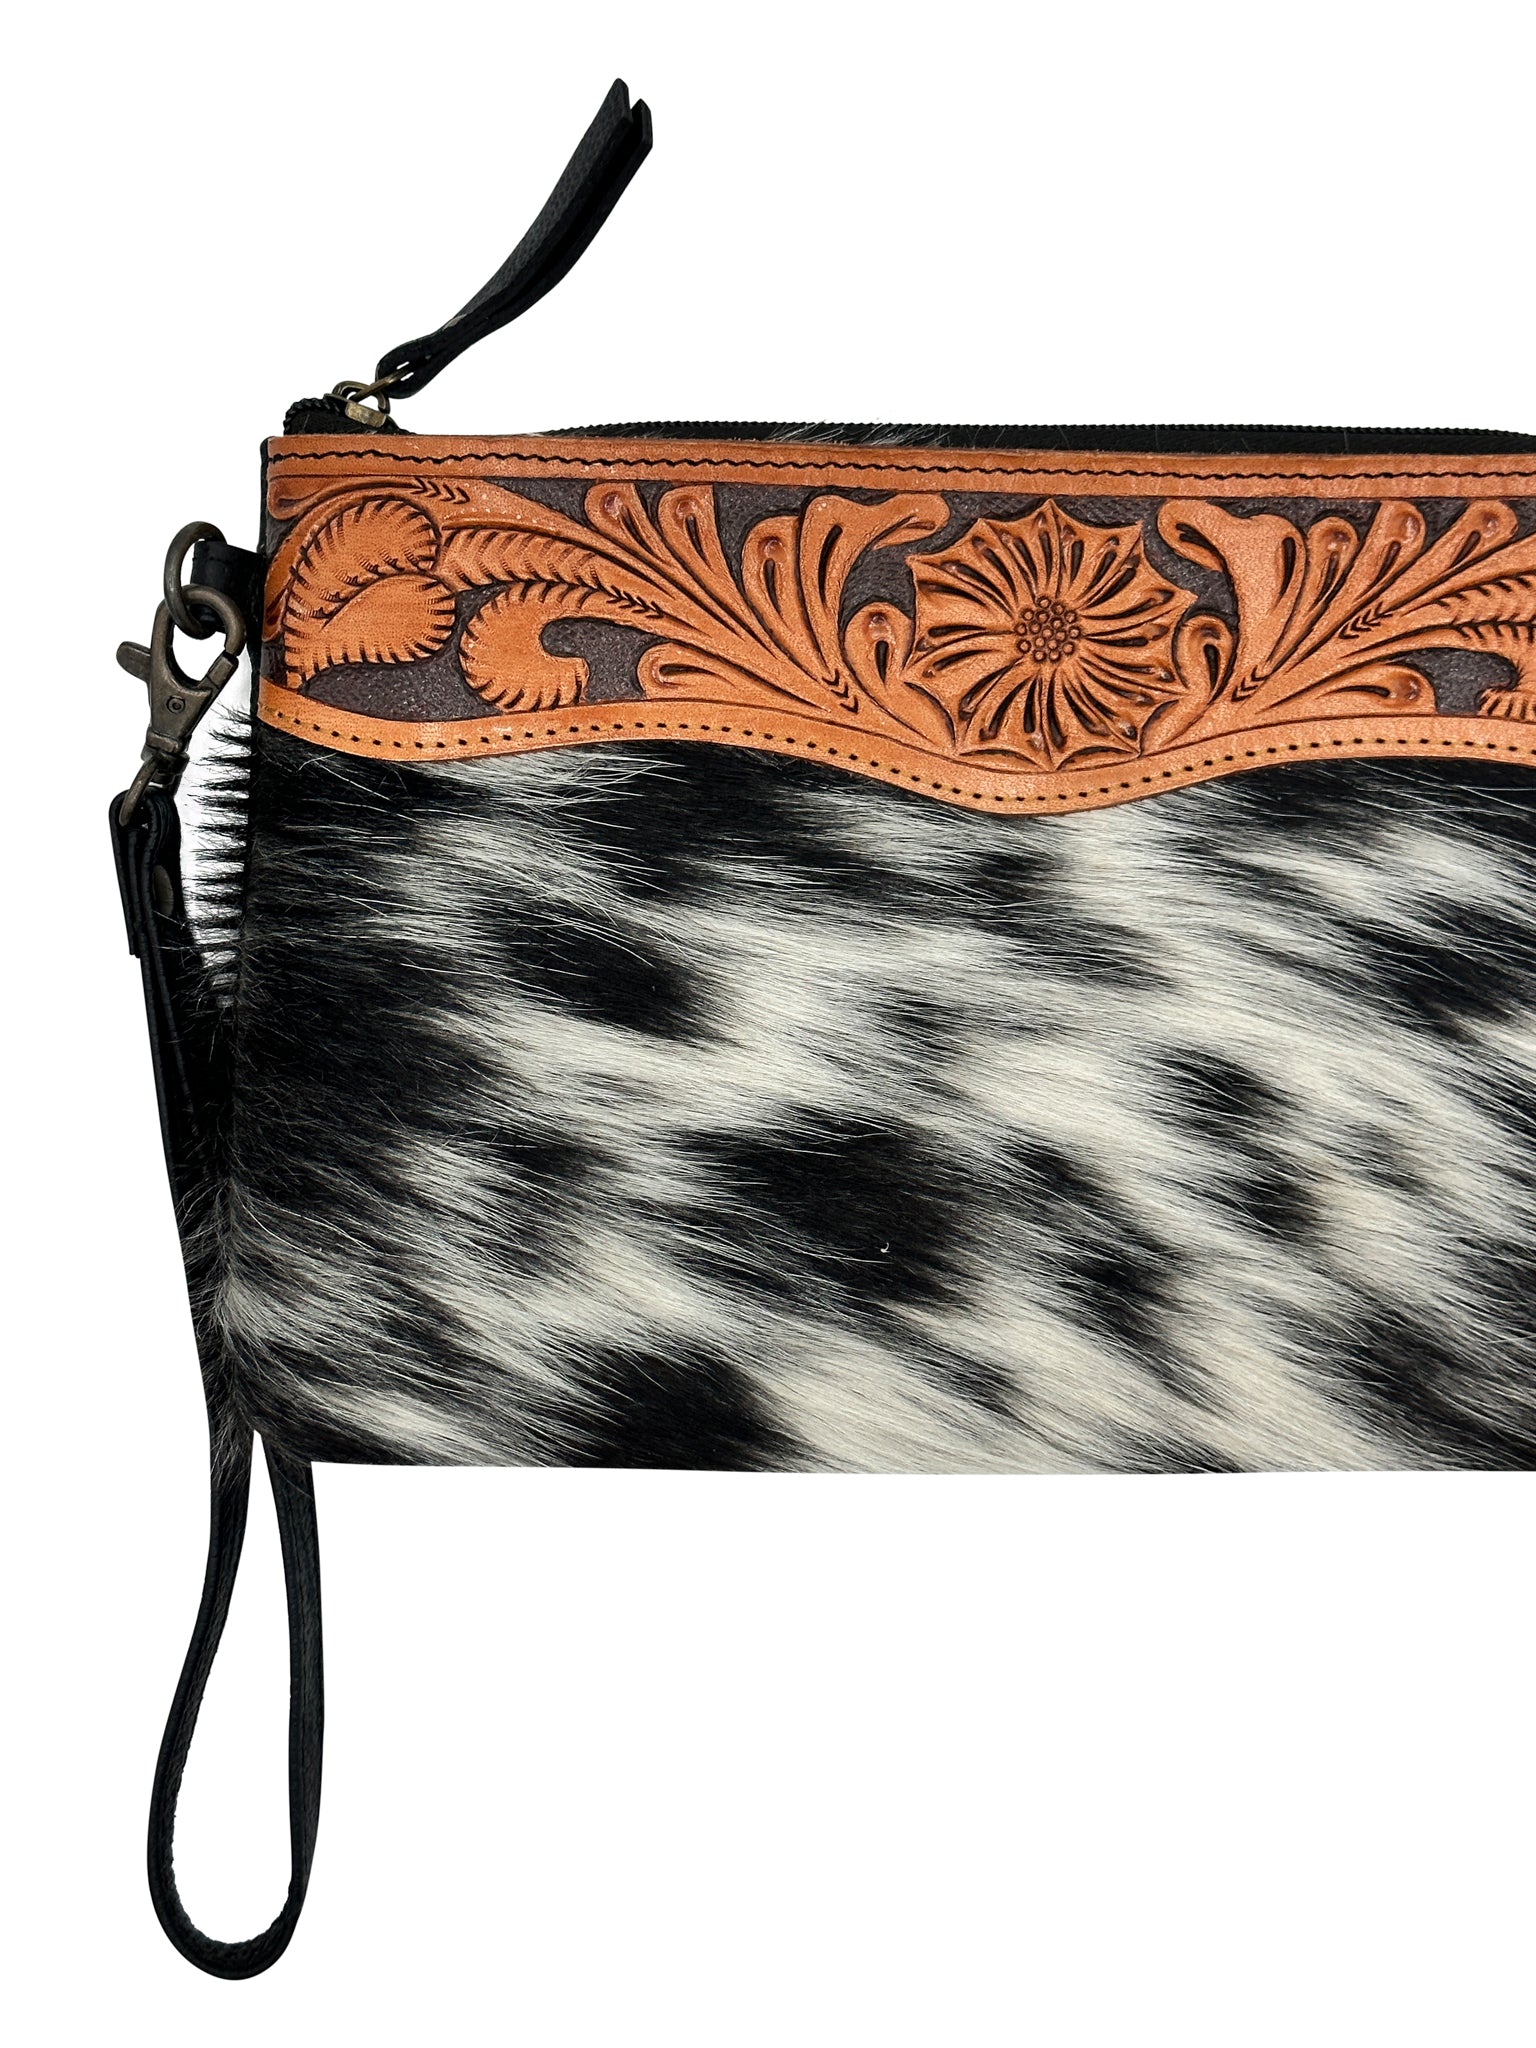 Black and White Cowhide Wristlet with Tooled Leather